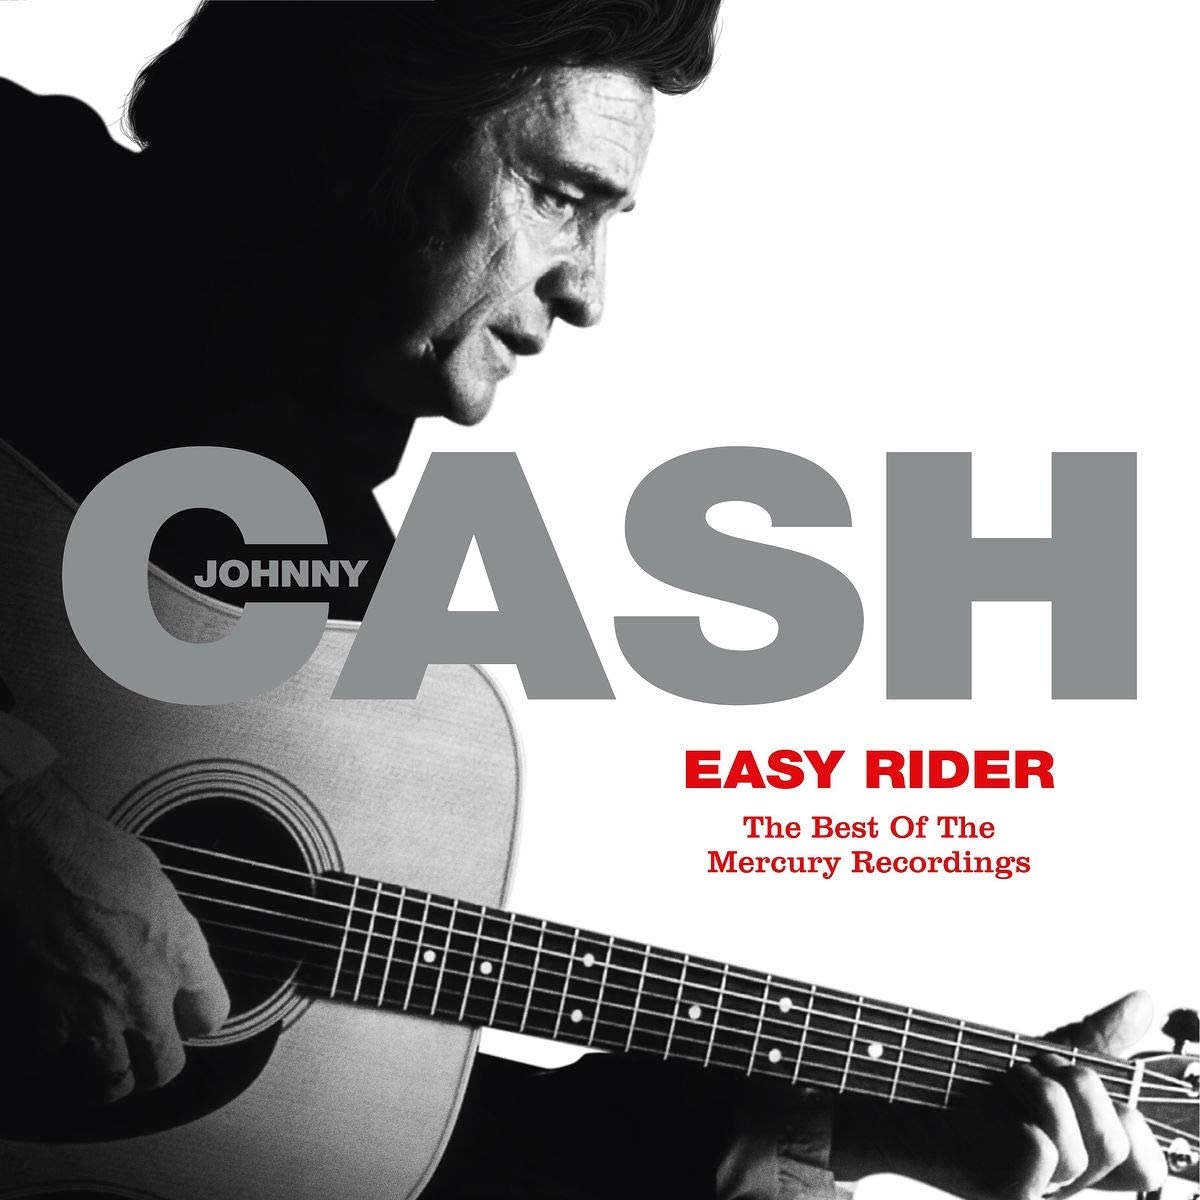 EASY RIDER THE BEST OF THE [Audio CD] Johnny Cash/